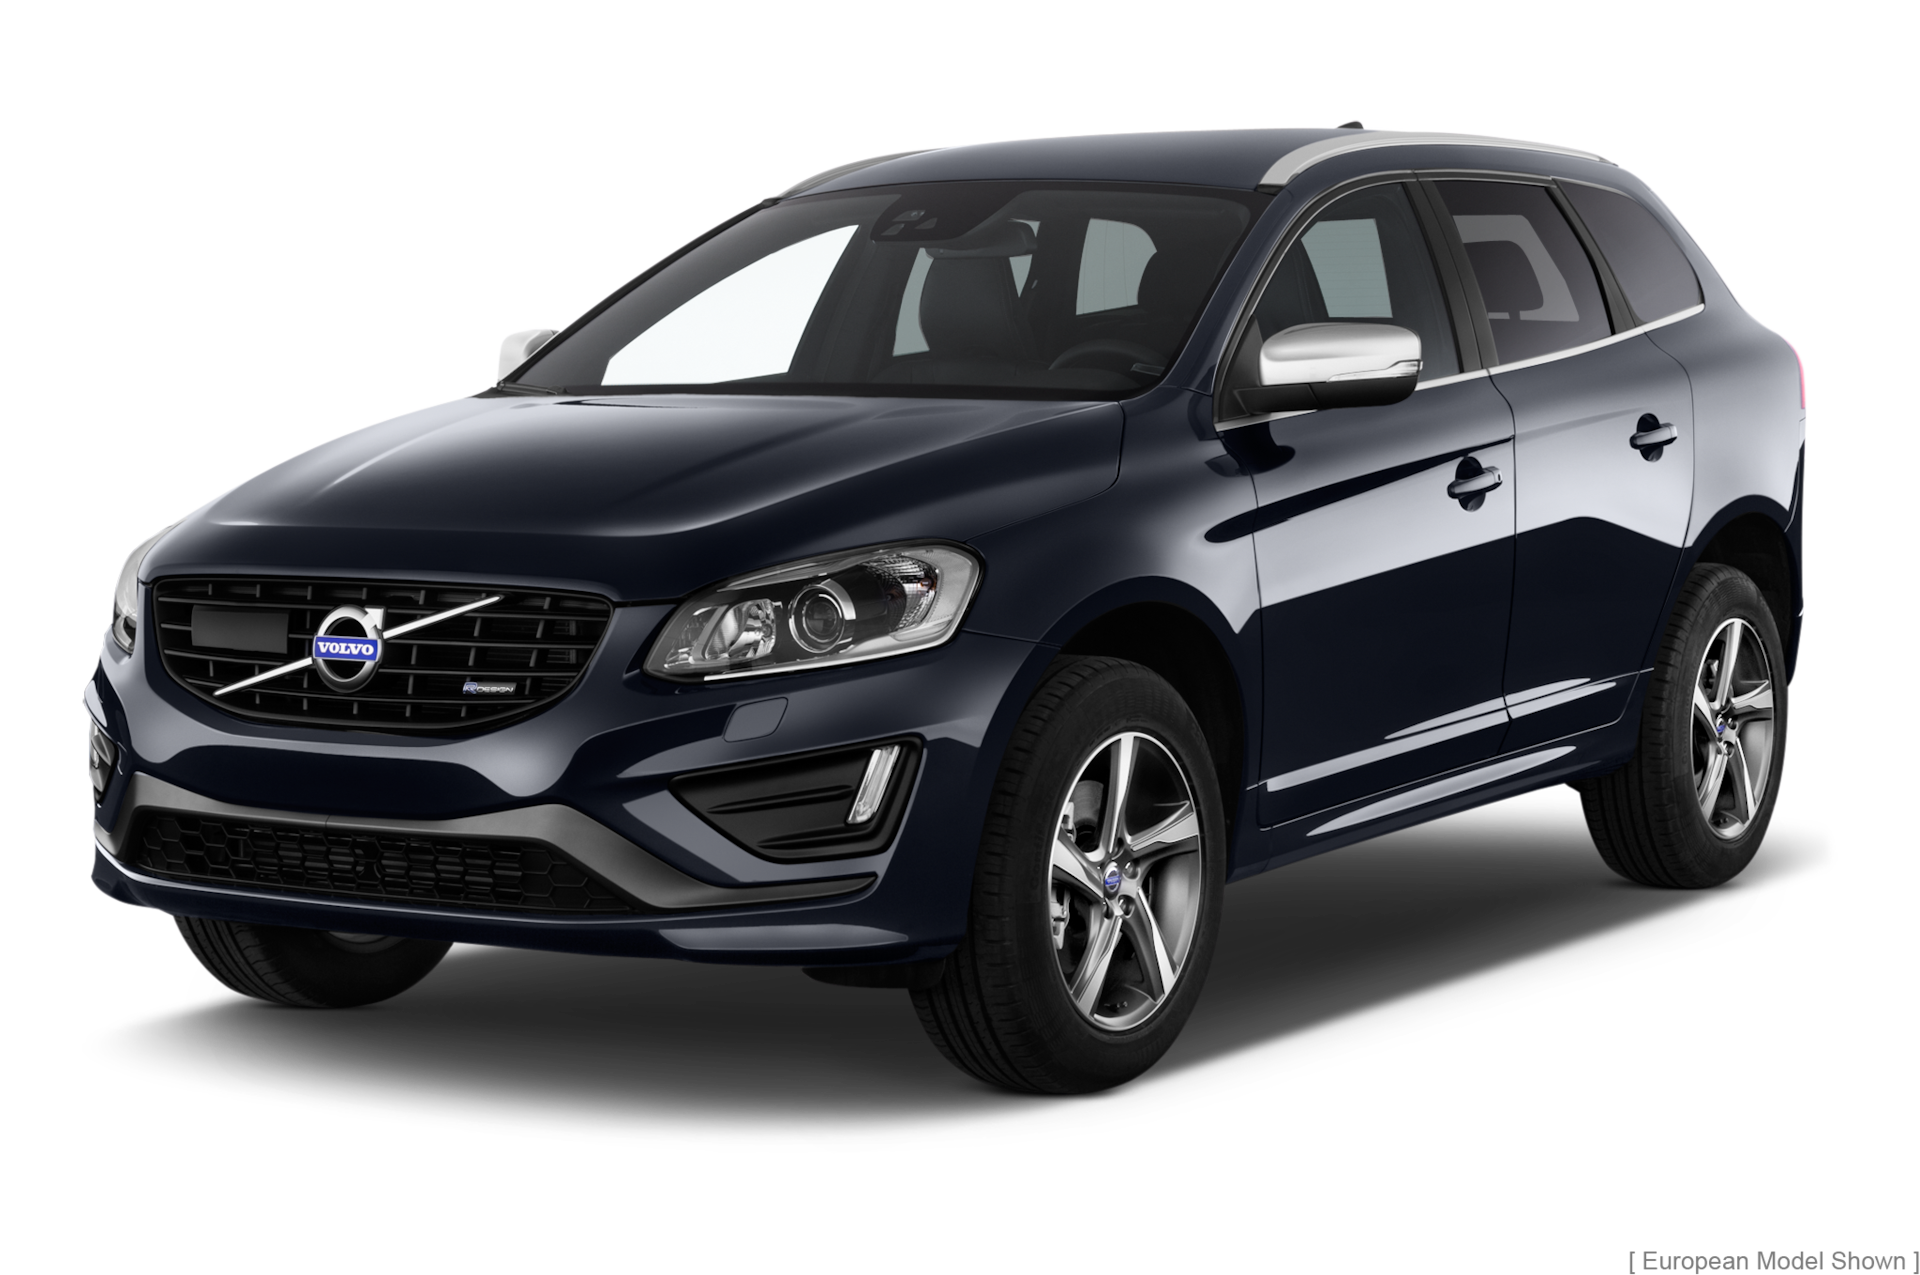 2014 Volvo XC60 Prices, Reviews, and Photos - MotorTrend